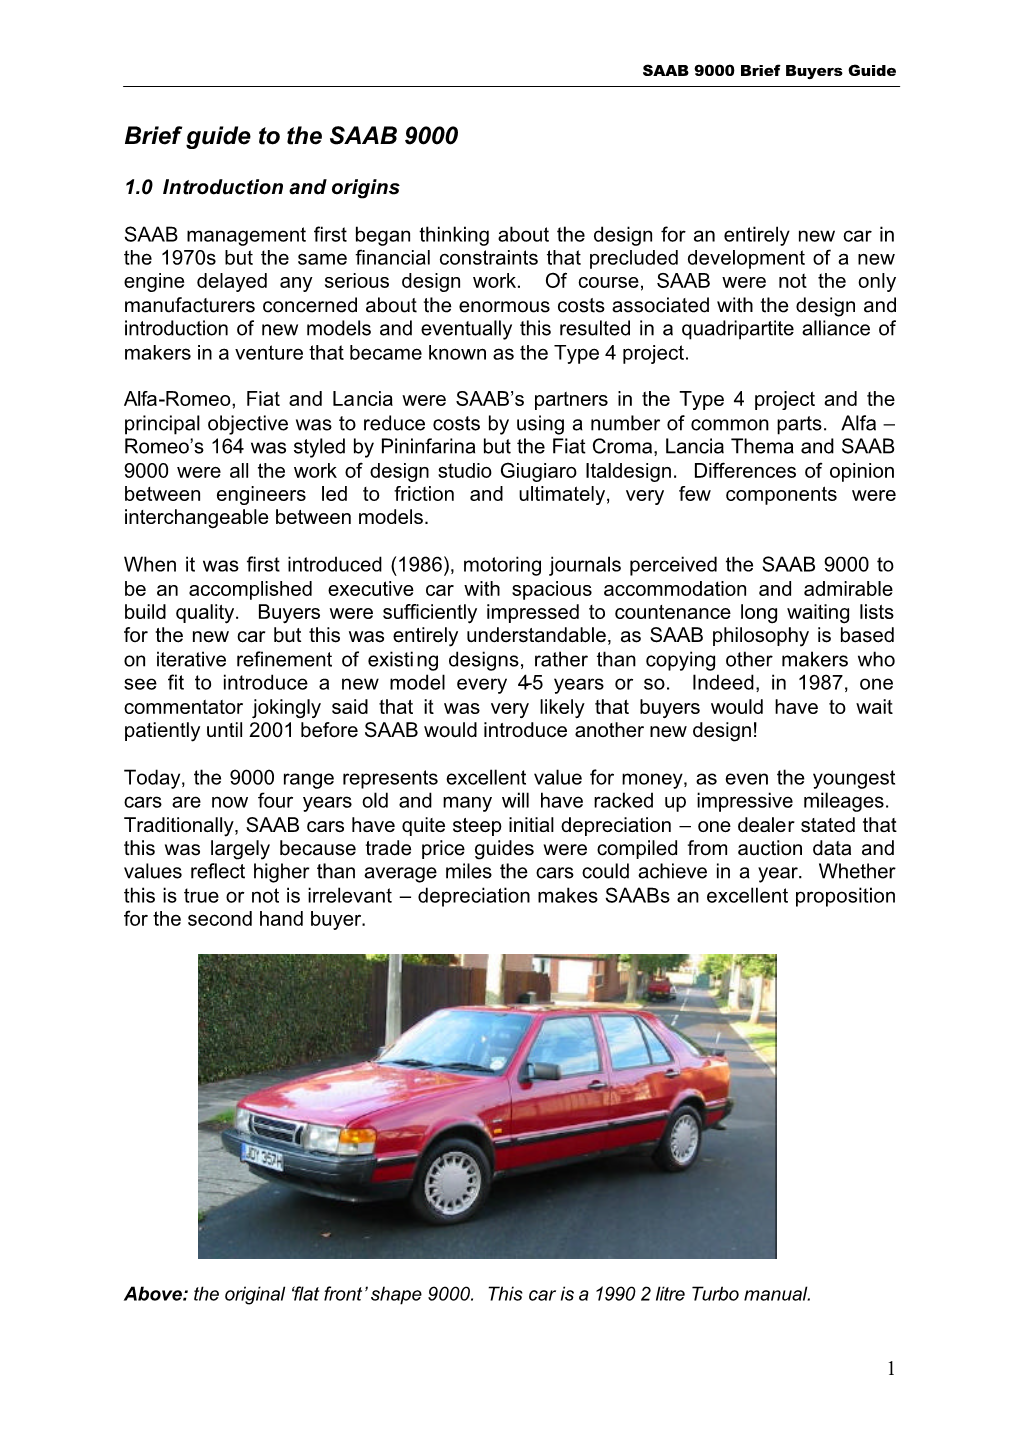 Brief Guide to the SAAB 9000